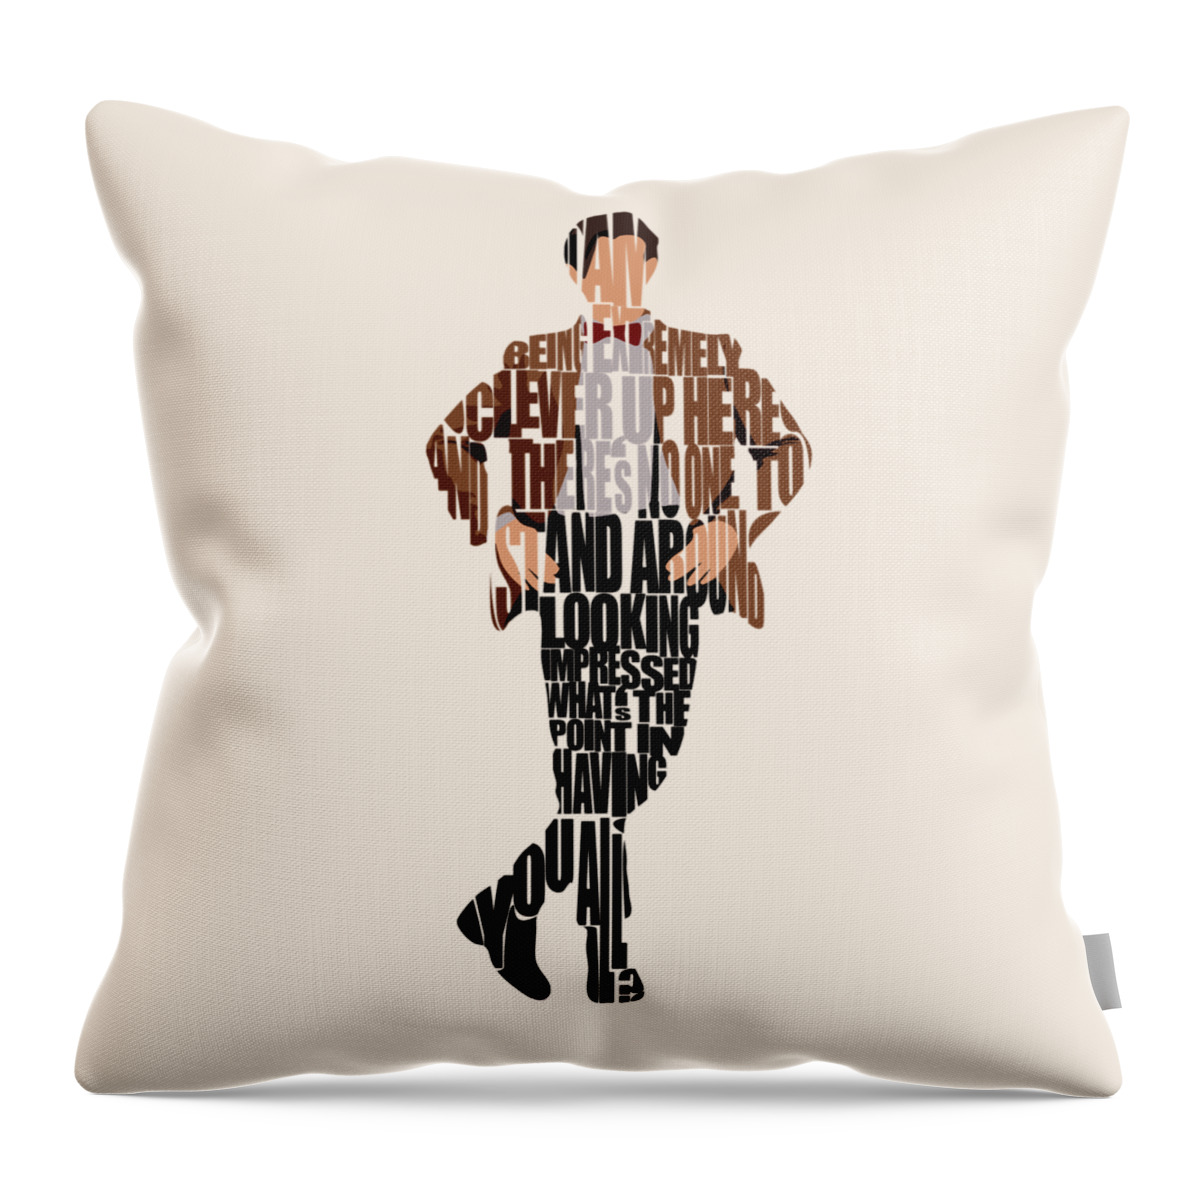 Eleventh Doctor Throw Pillow featuring the digital art Eleventh Doctor - Doctor Who by Inspirowl Design